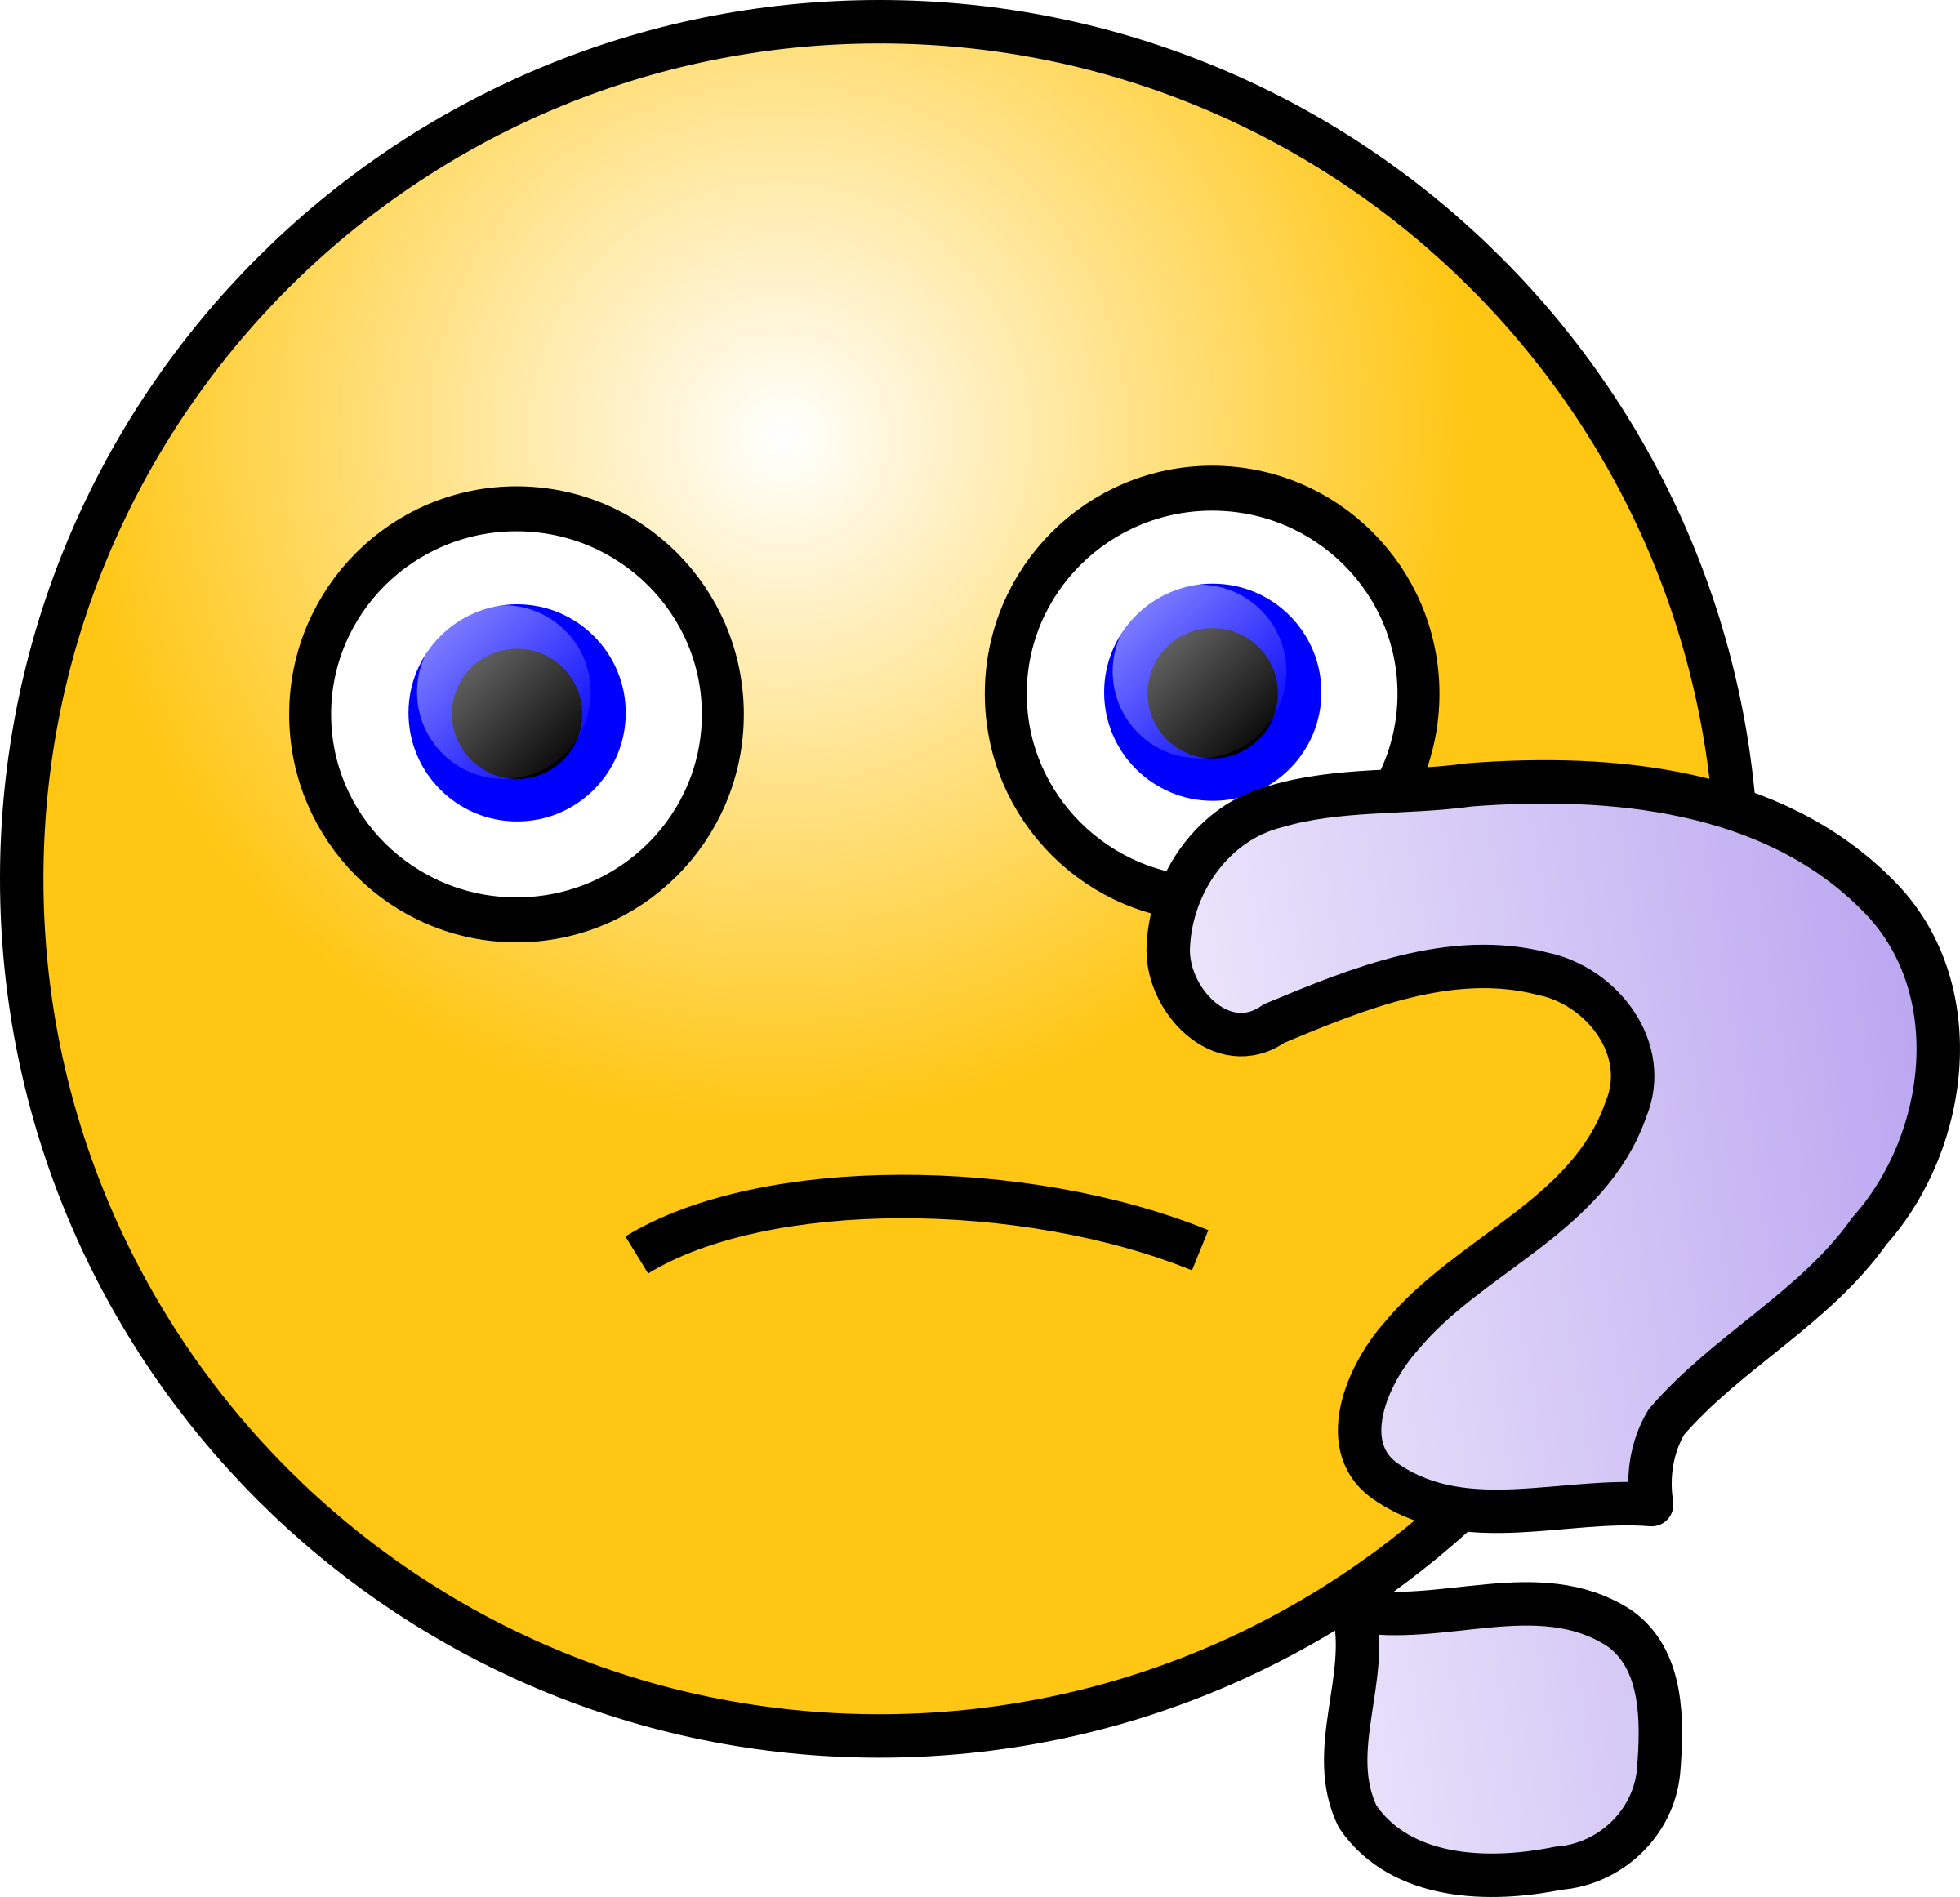 Focus clipart questioned face. Worried emoticon group emotions